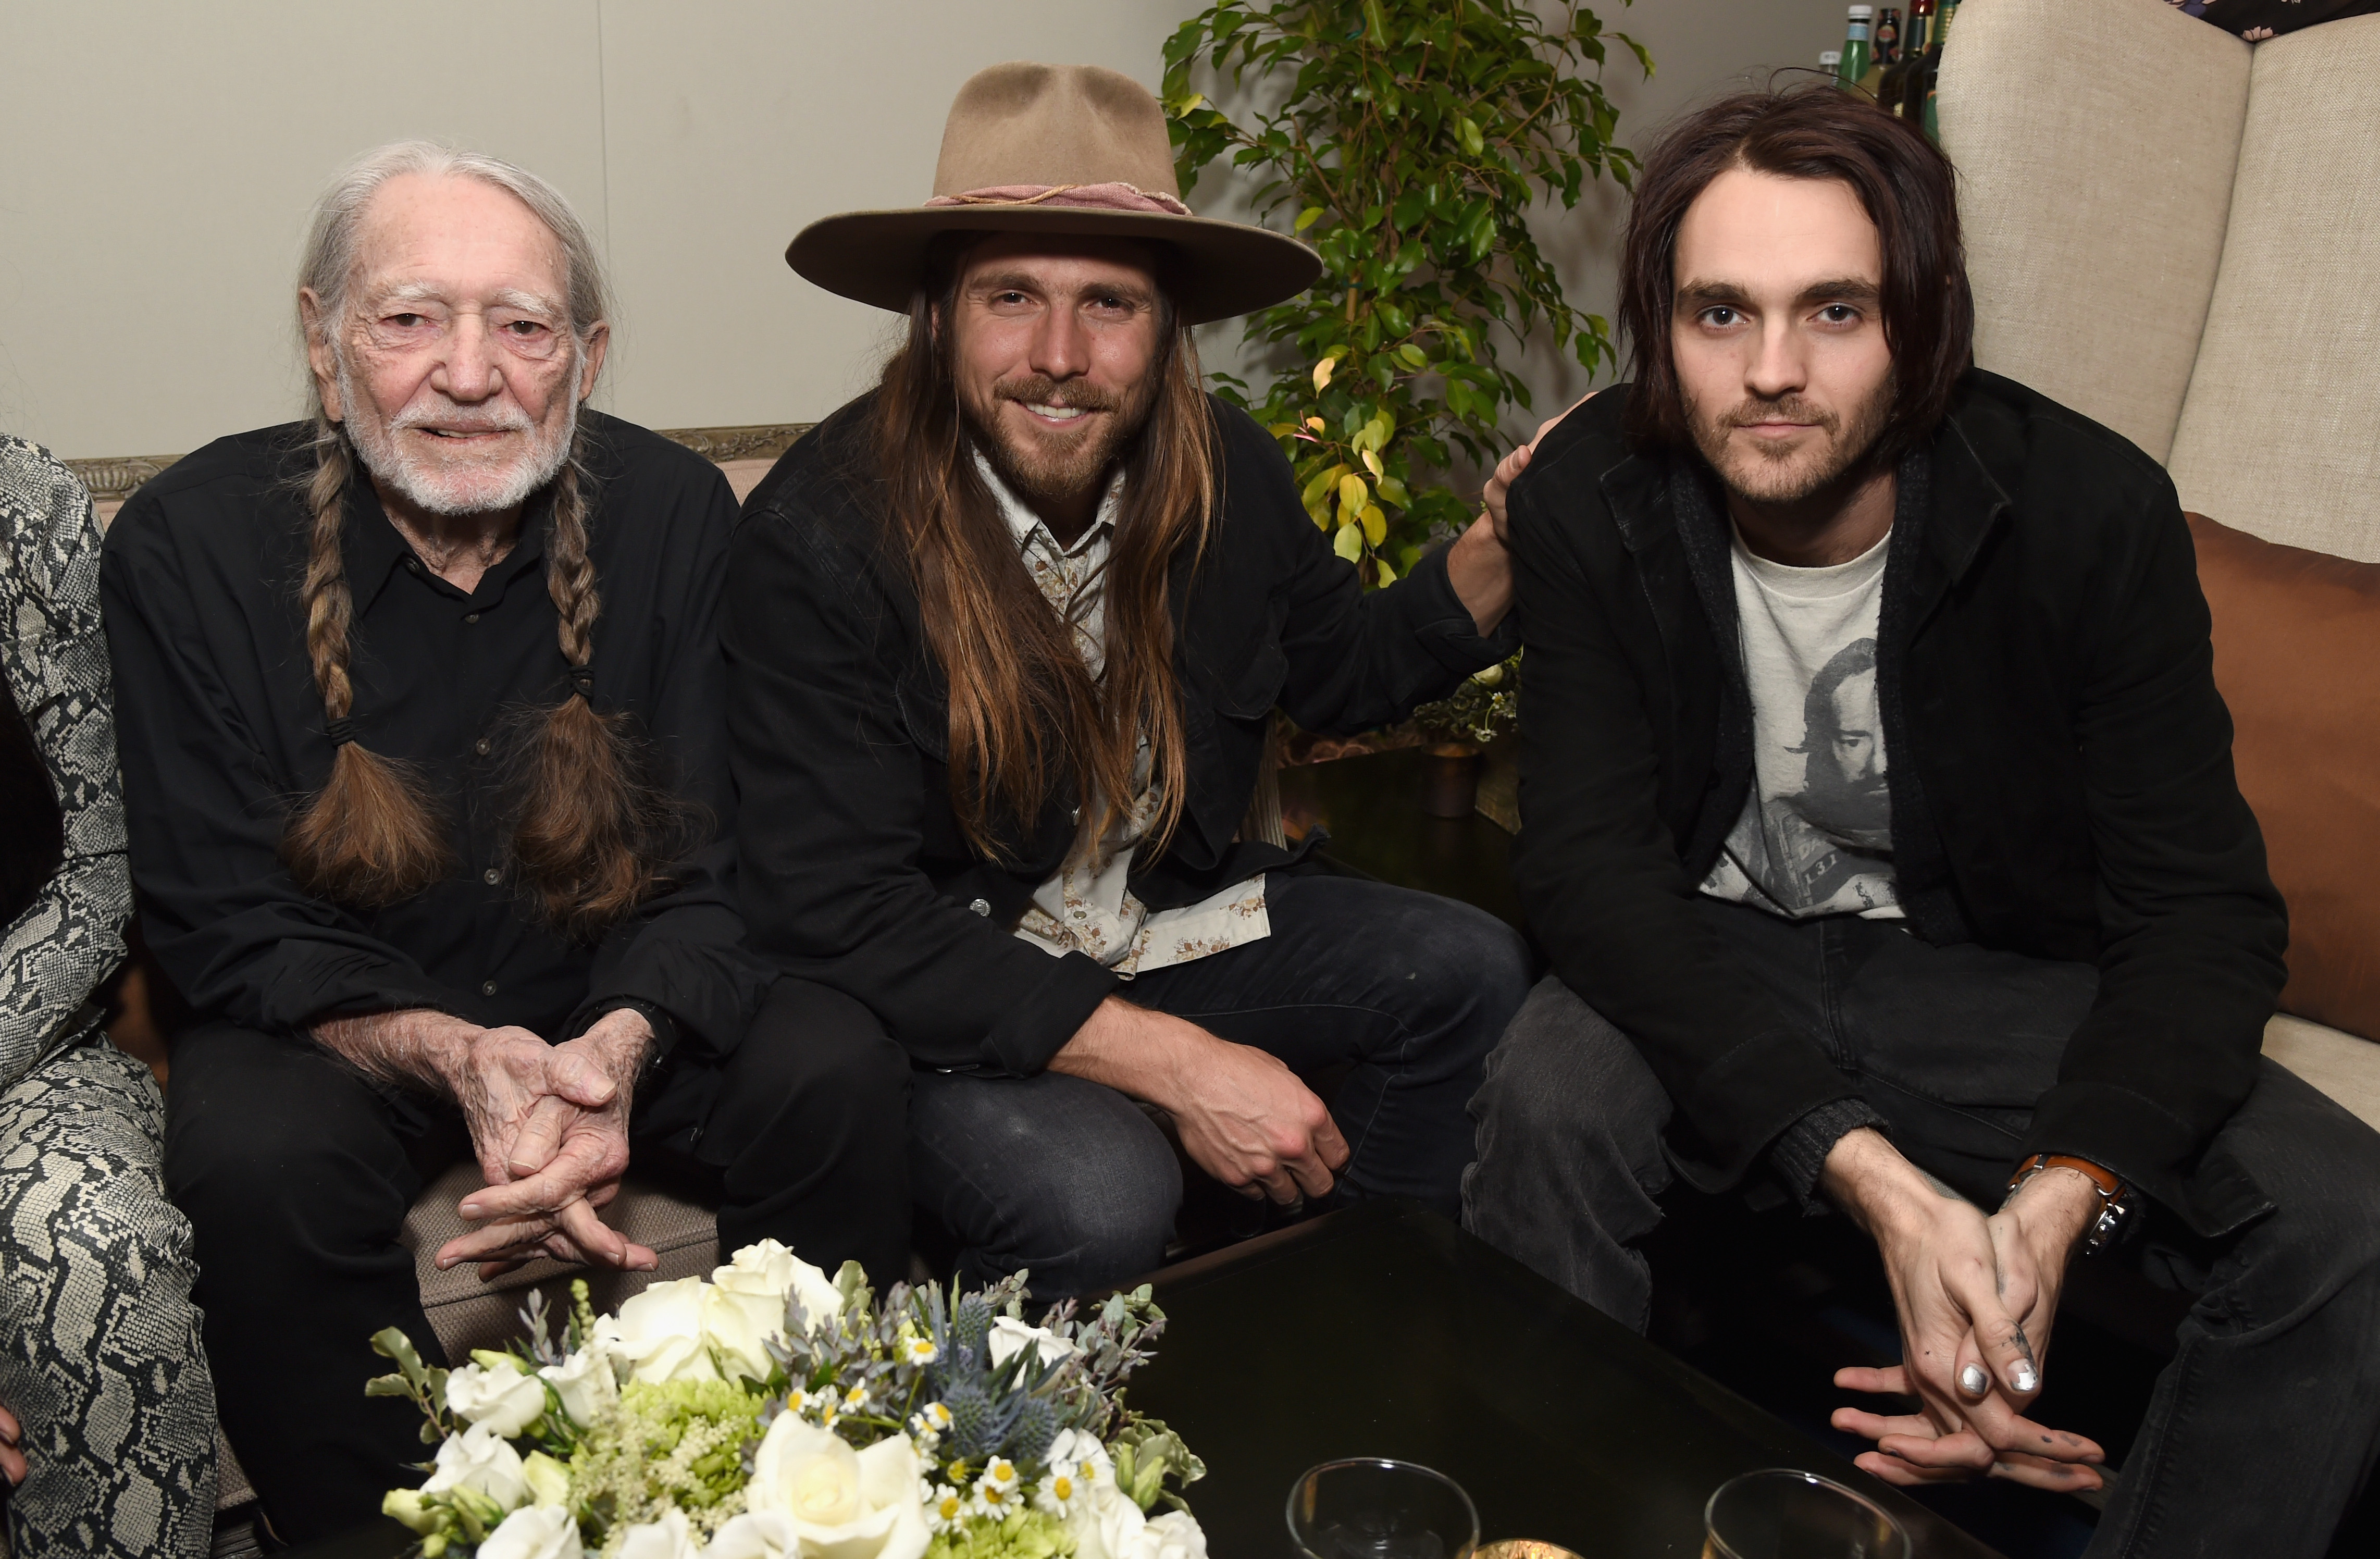 Willie Nelson, Lukas Nelson, and Micah Nelson on February 6, 2019 in Los Angeles, California | Source: Getty Images